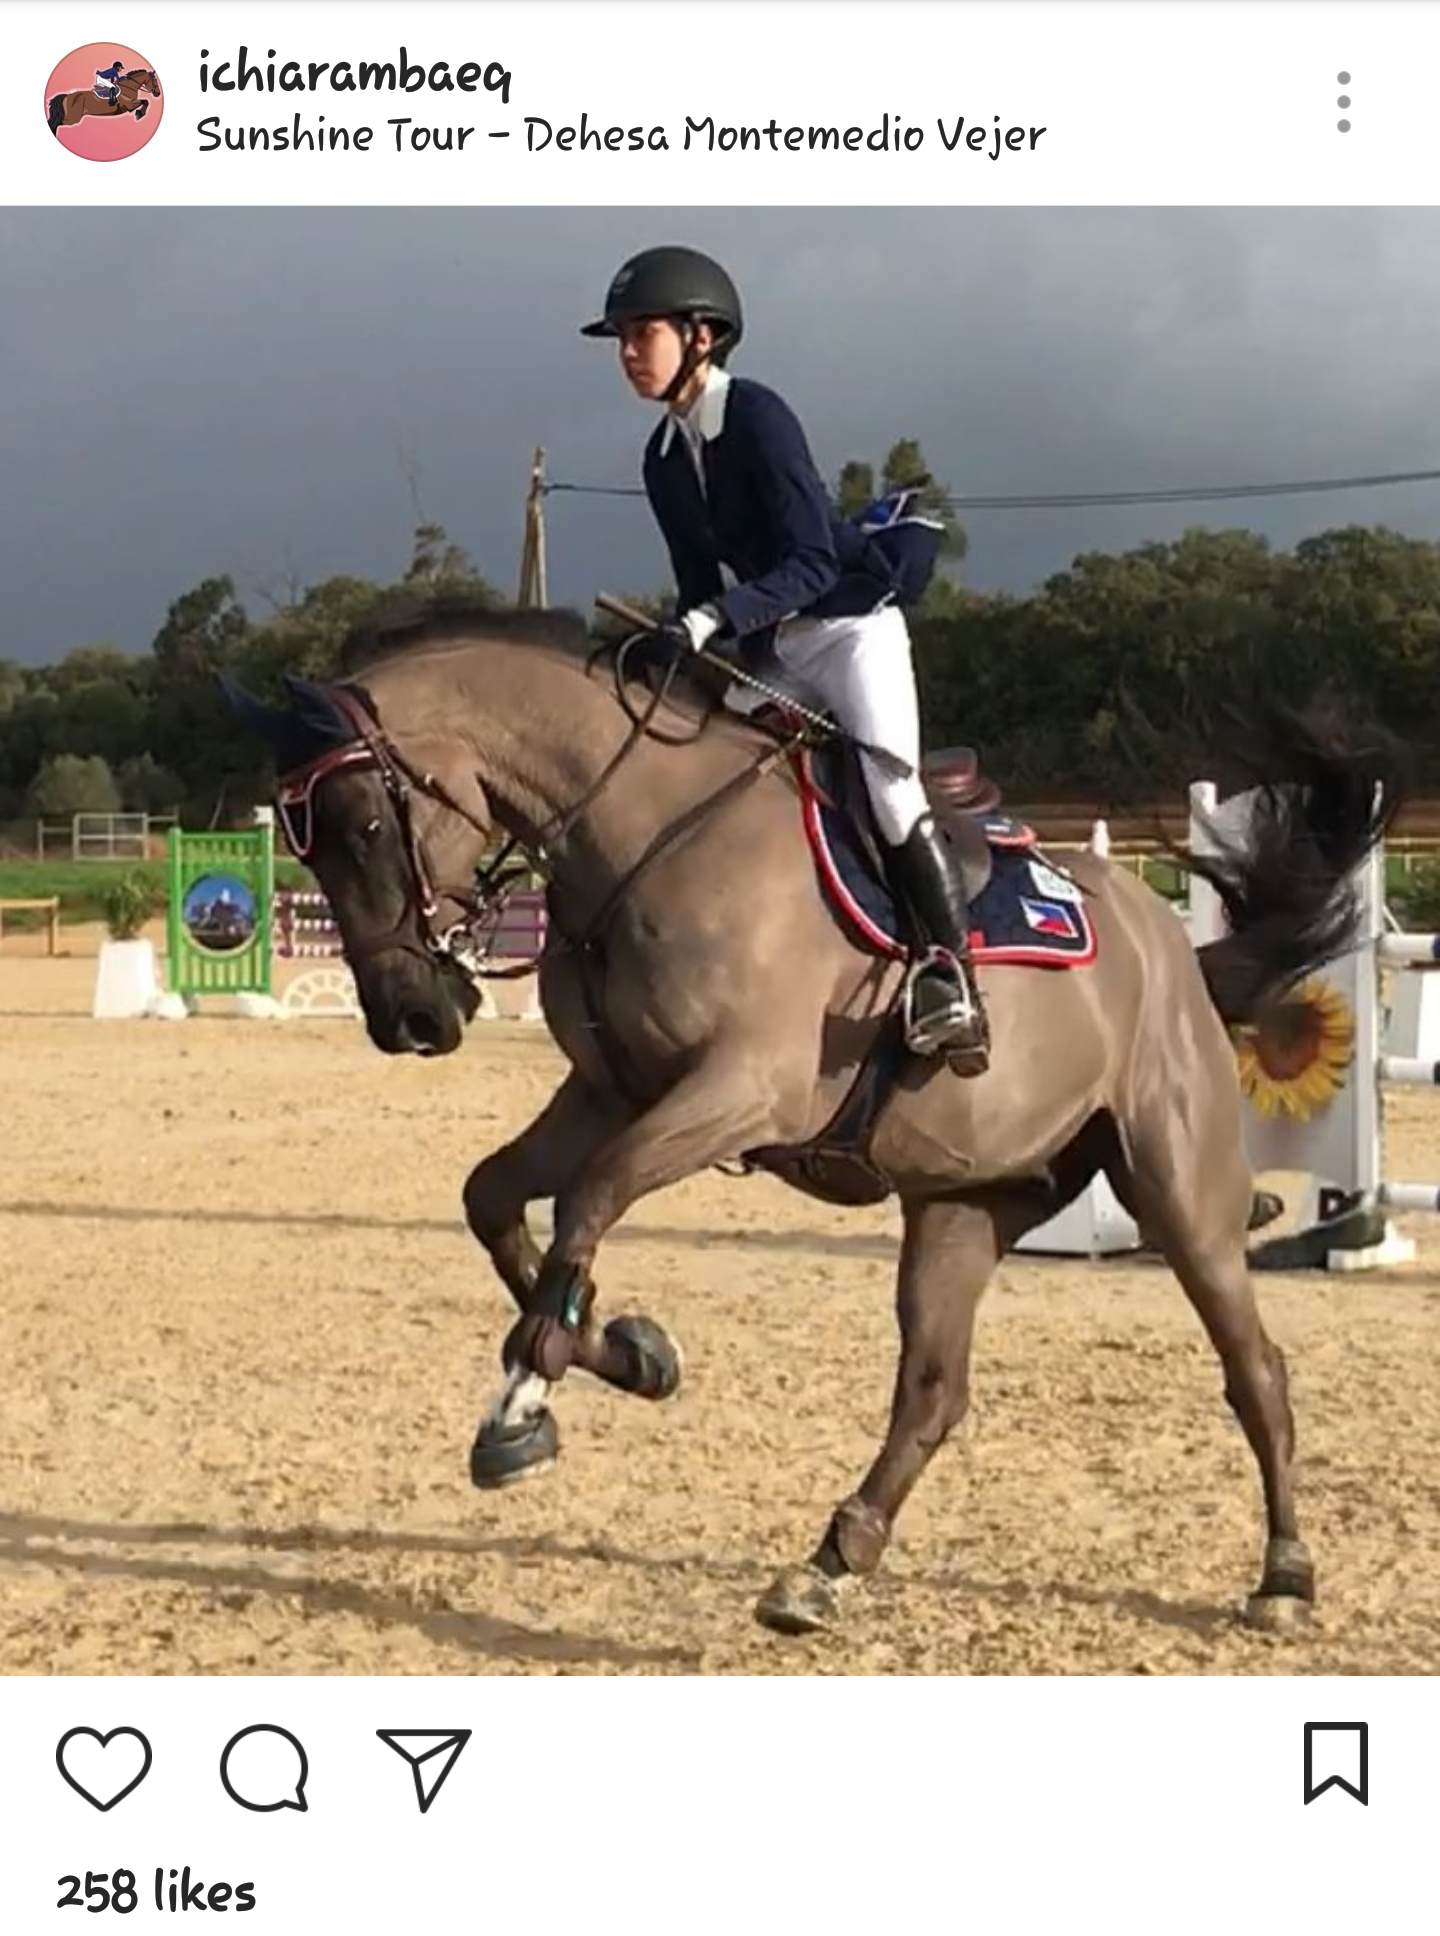 Equestrian is life for 2020 Olympic hopeful